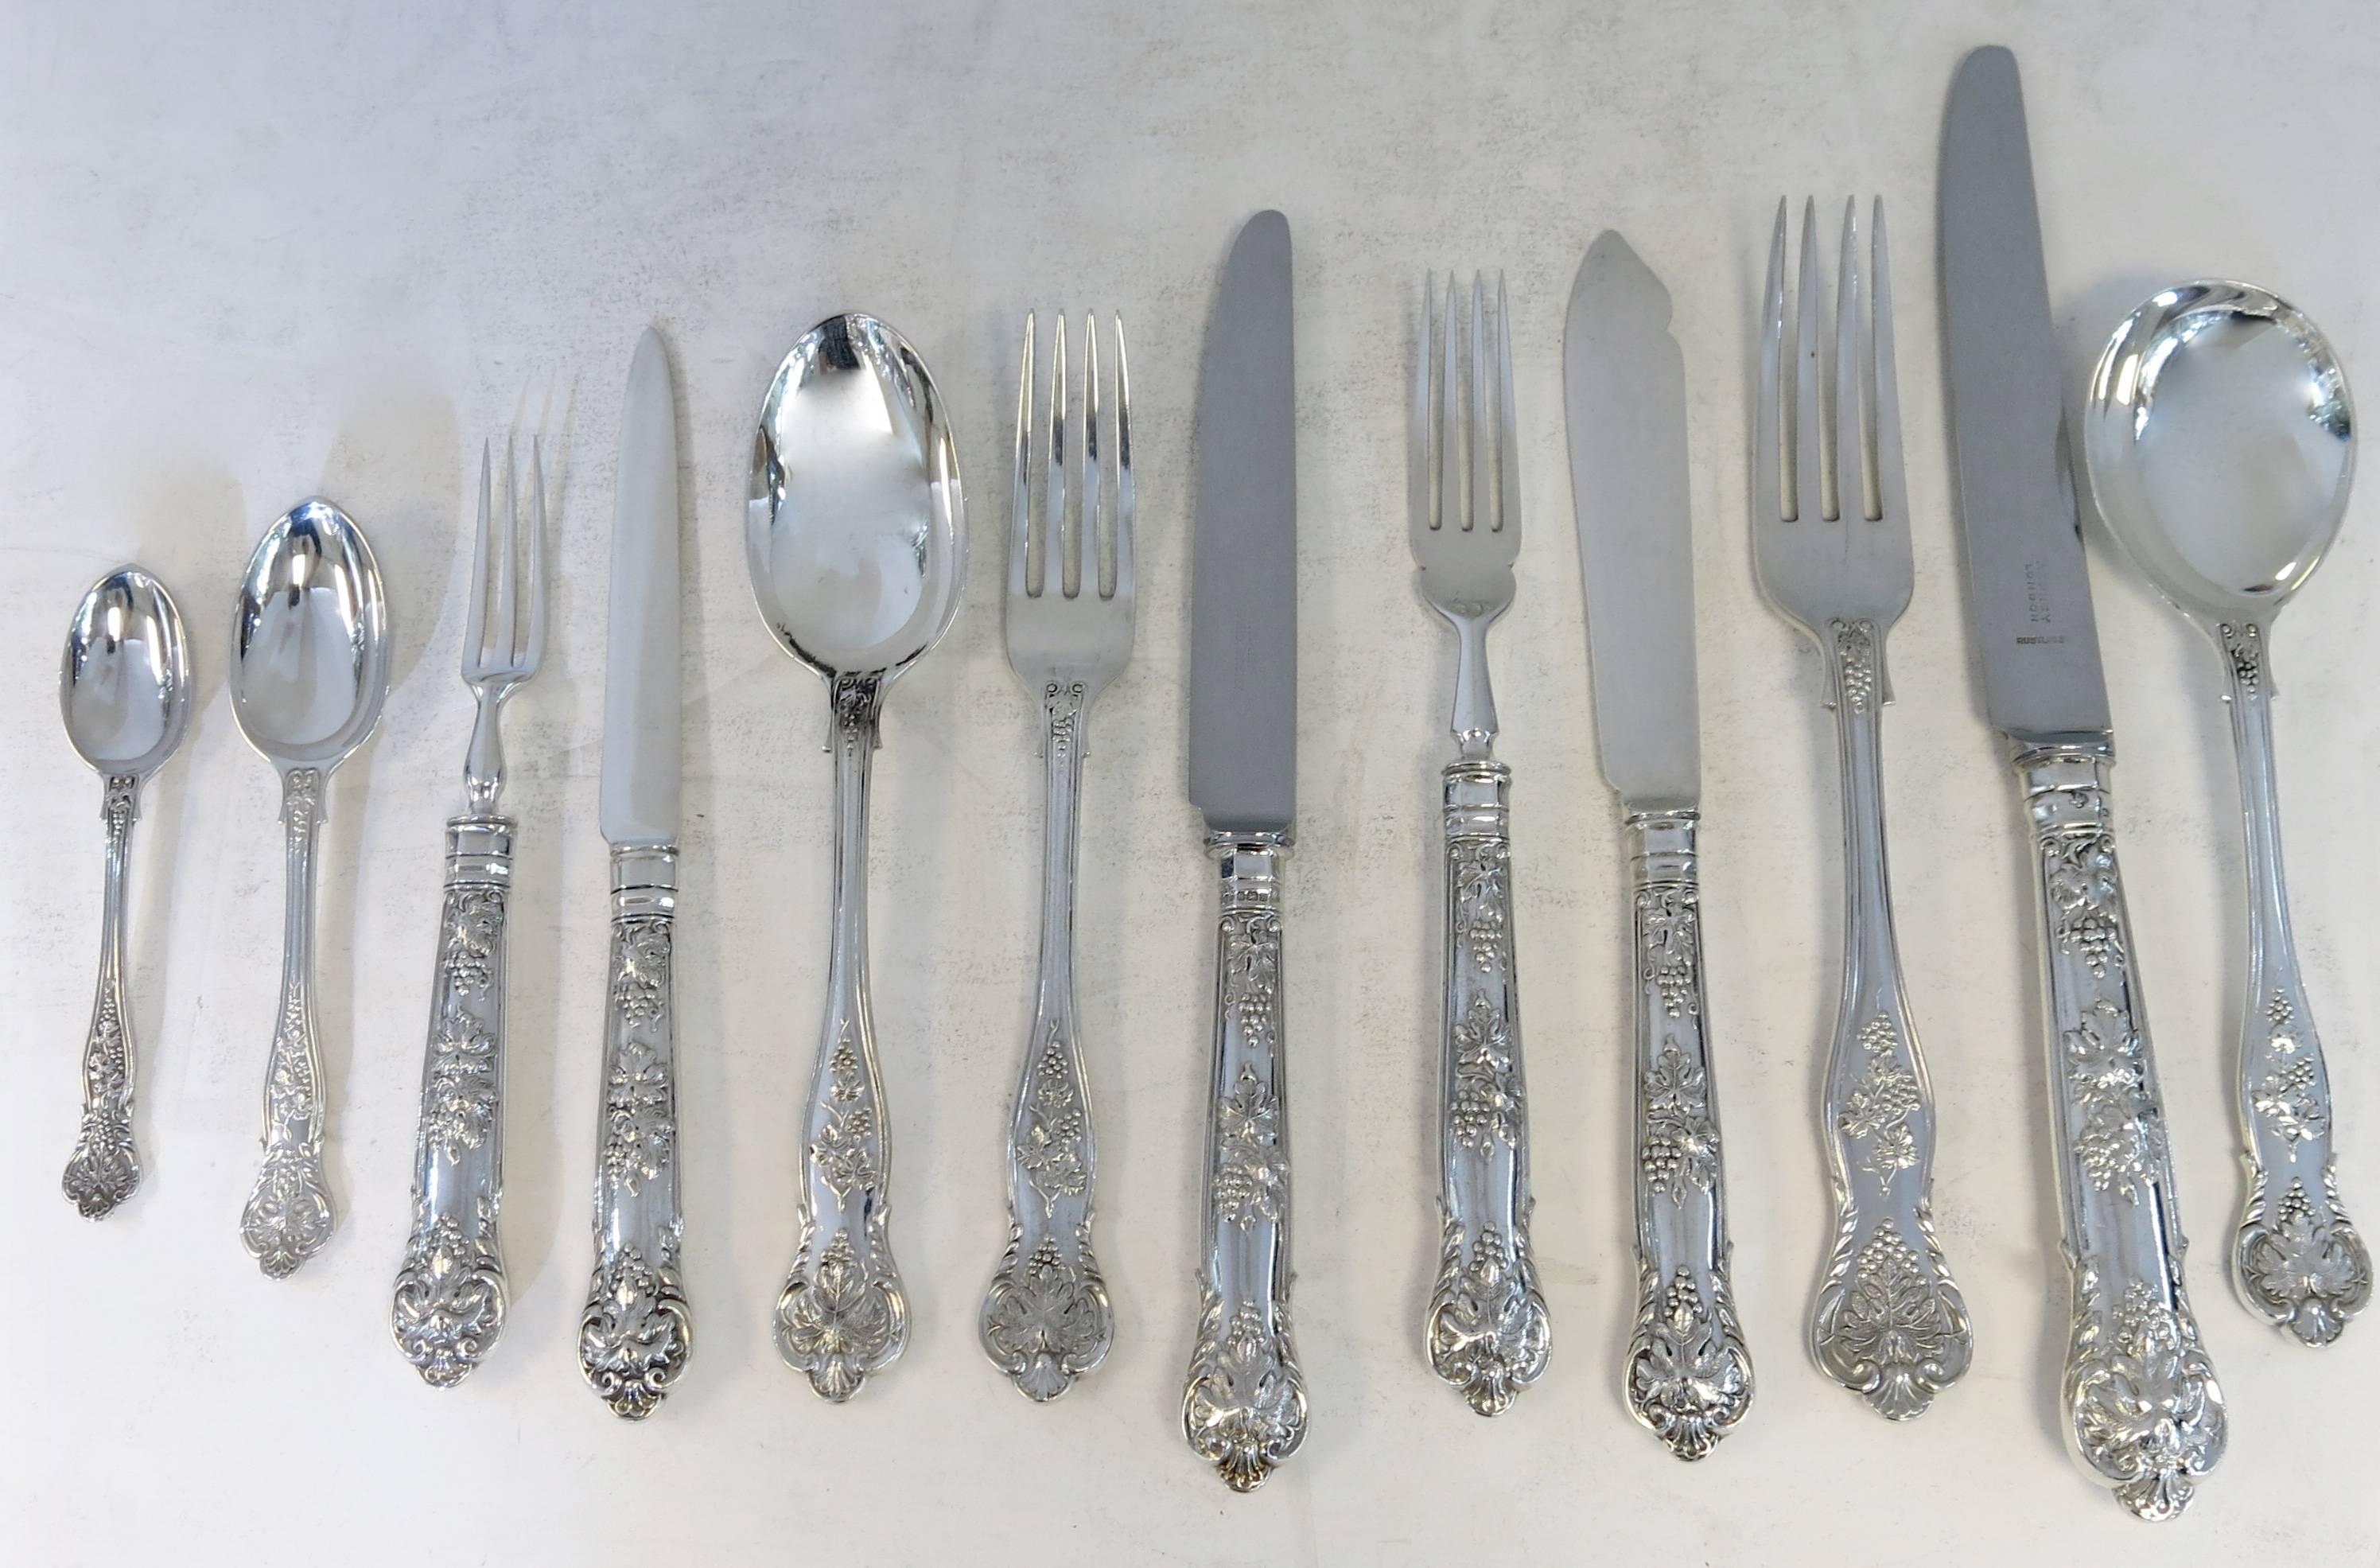 English, sterling silver, trailing vine flatware set By Asprey & Co, Regent Street London. Purveyors to the crown. This is a very rare pattern, and is beautifully hand-forged. The set is fitted into the original three-drawer fitted cabinet, complete